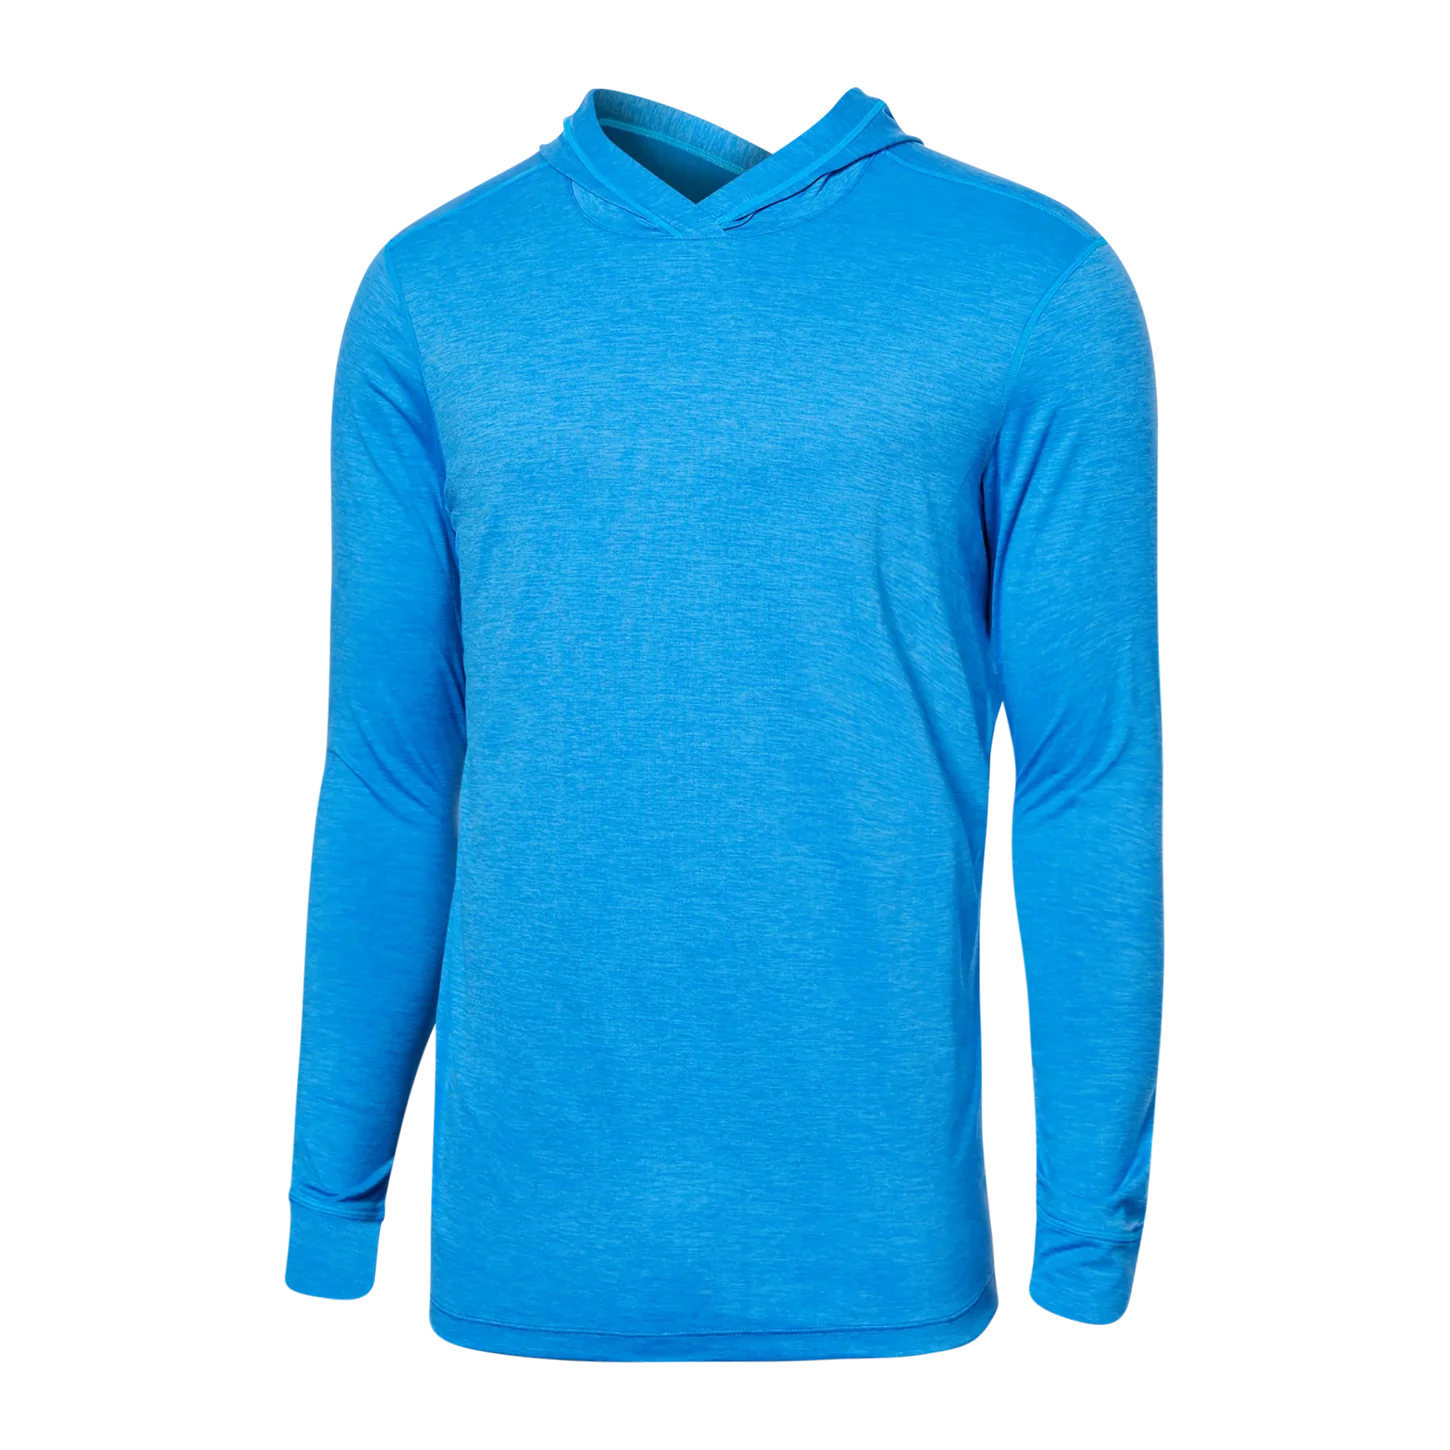 DROPTEMP ALL DAY COOL HOODIE-Shirts & Tops-SAXX-SMALL-RACER BLUE HEATHER-Coriander